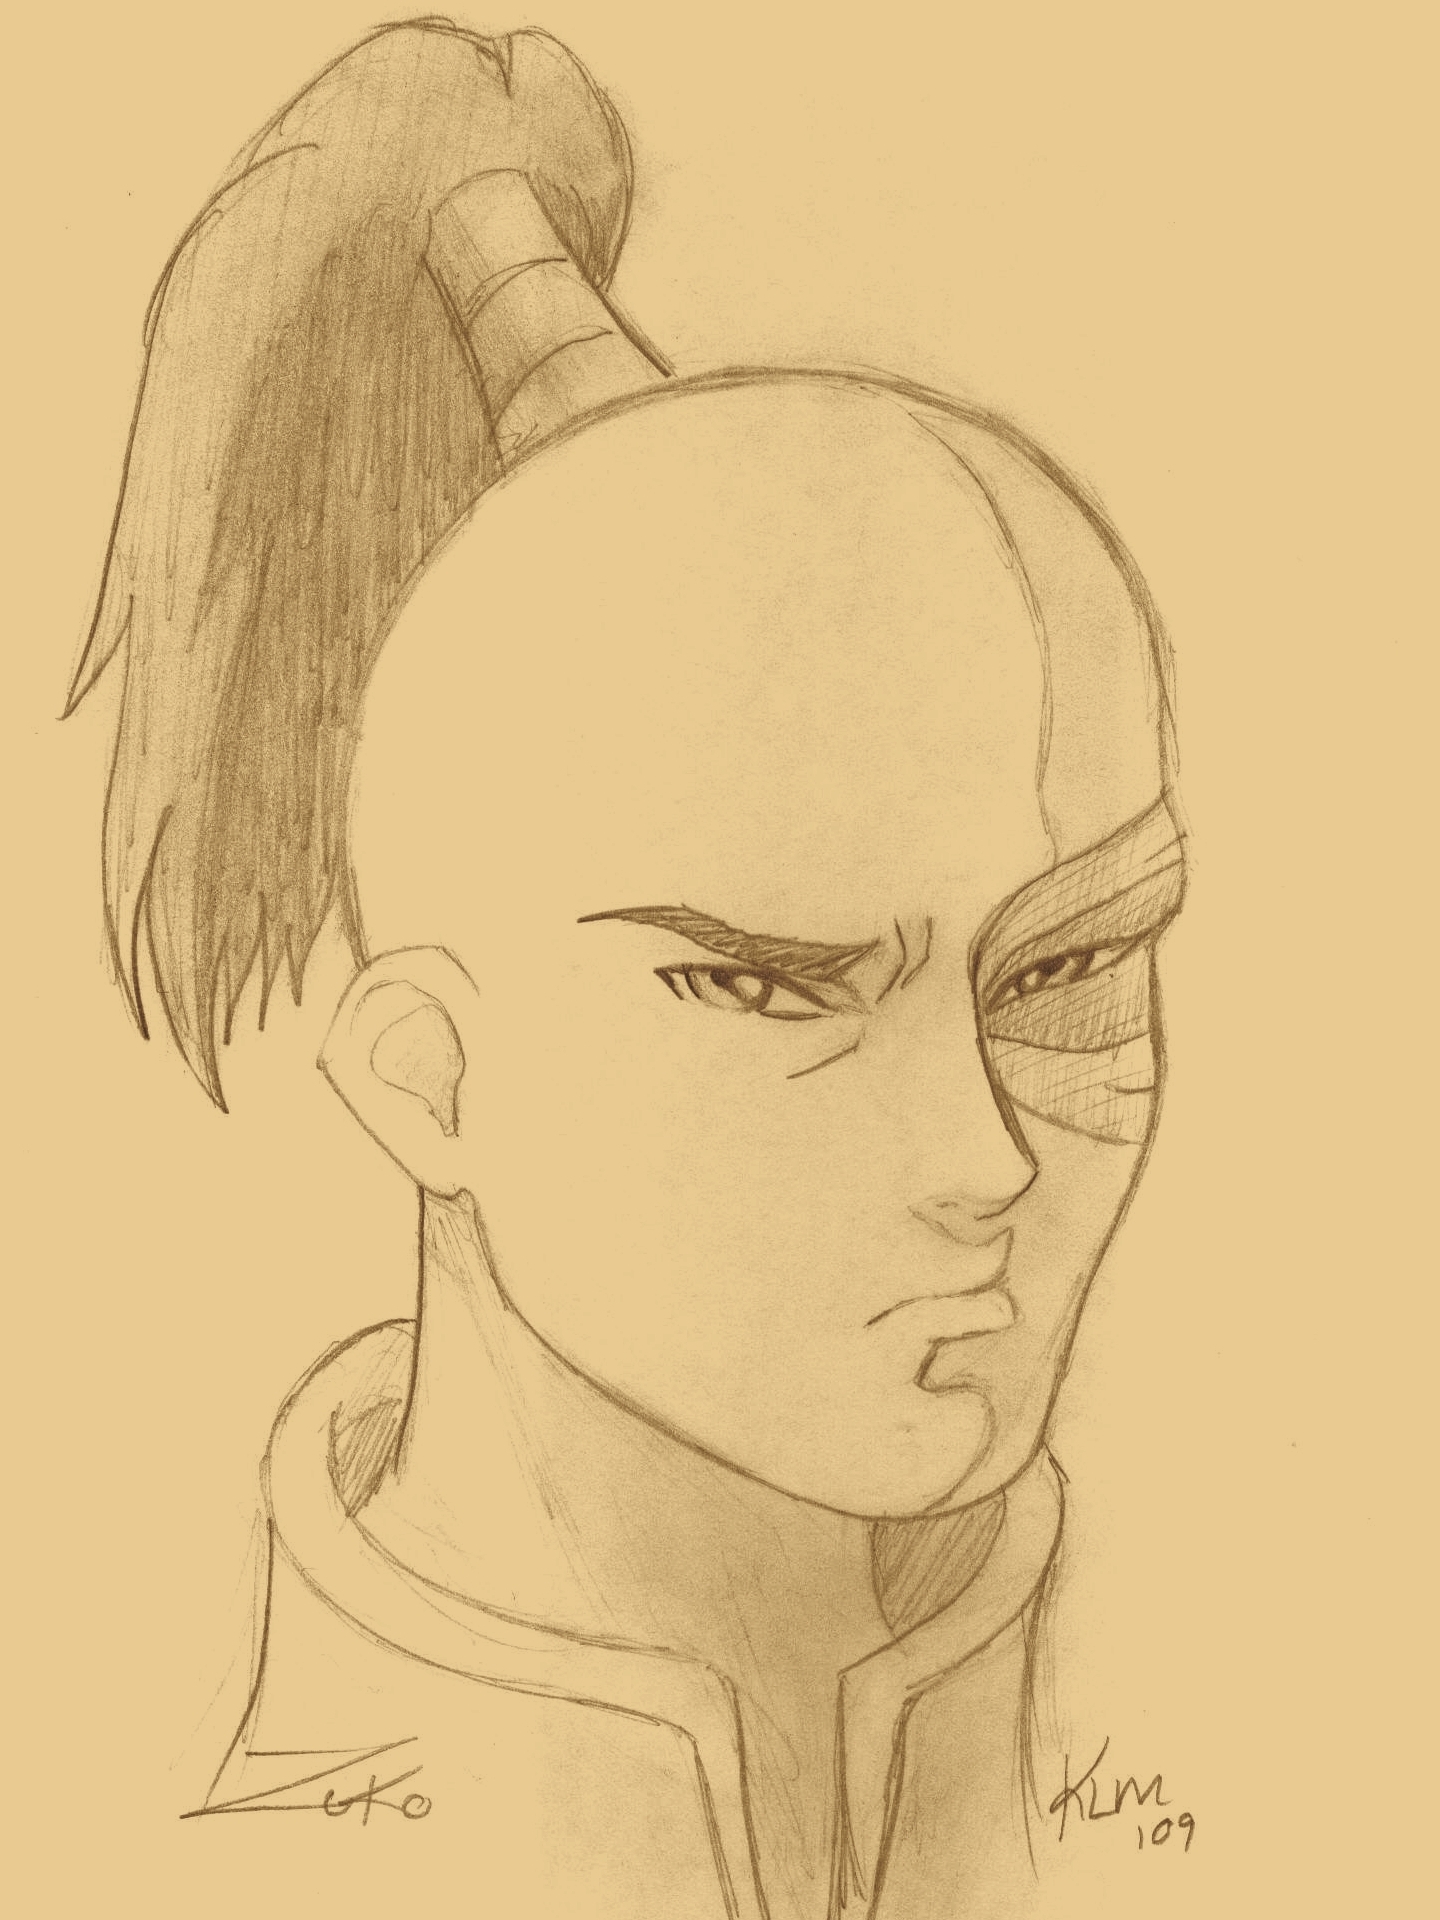 Avatar: The Last Airbender Images on Fanpop.